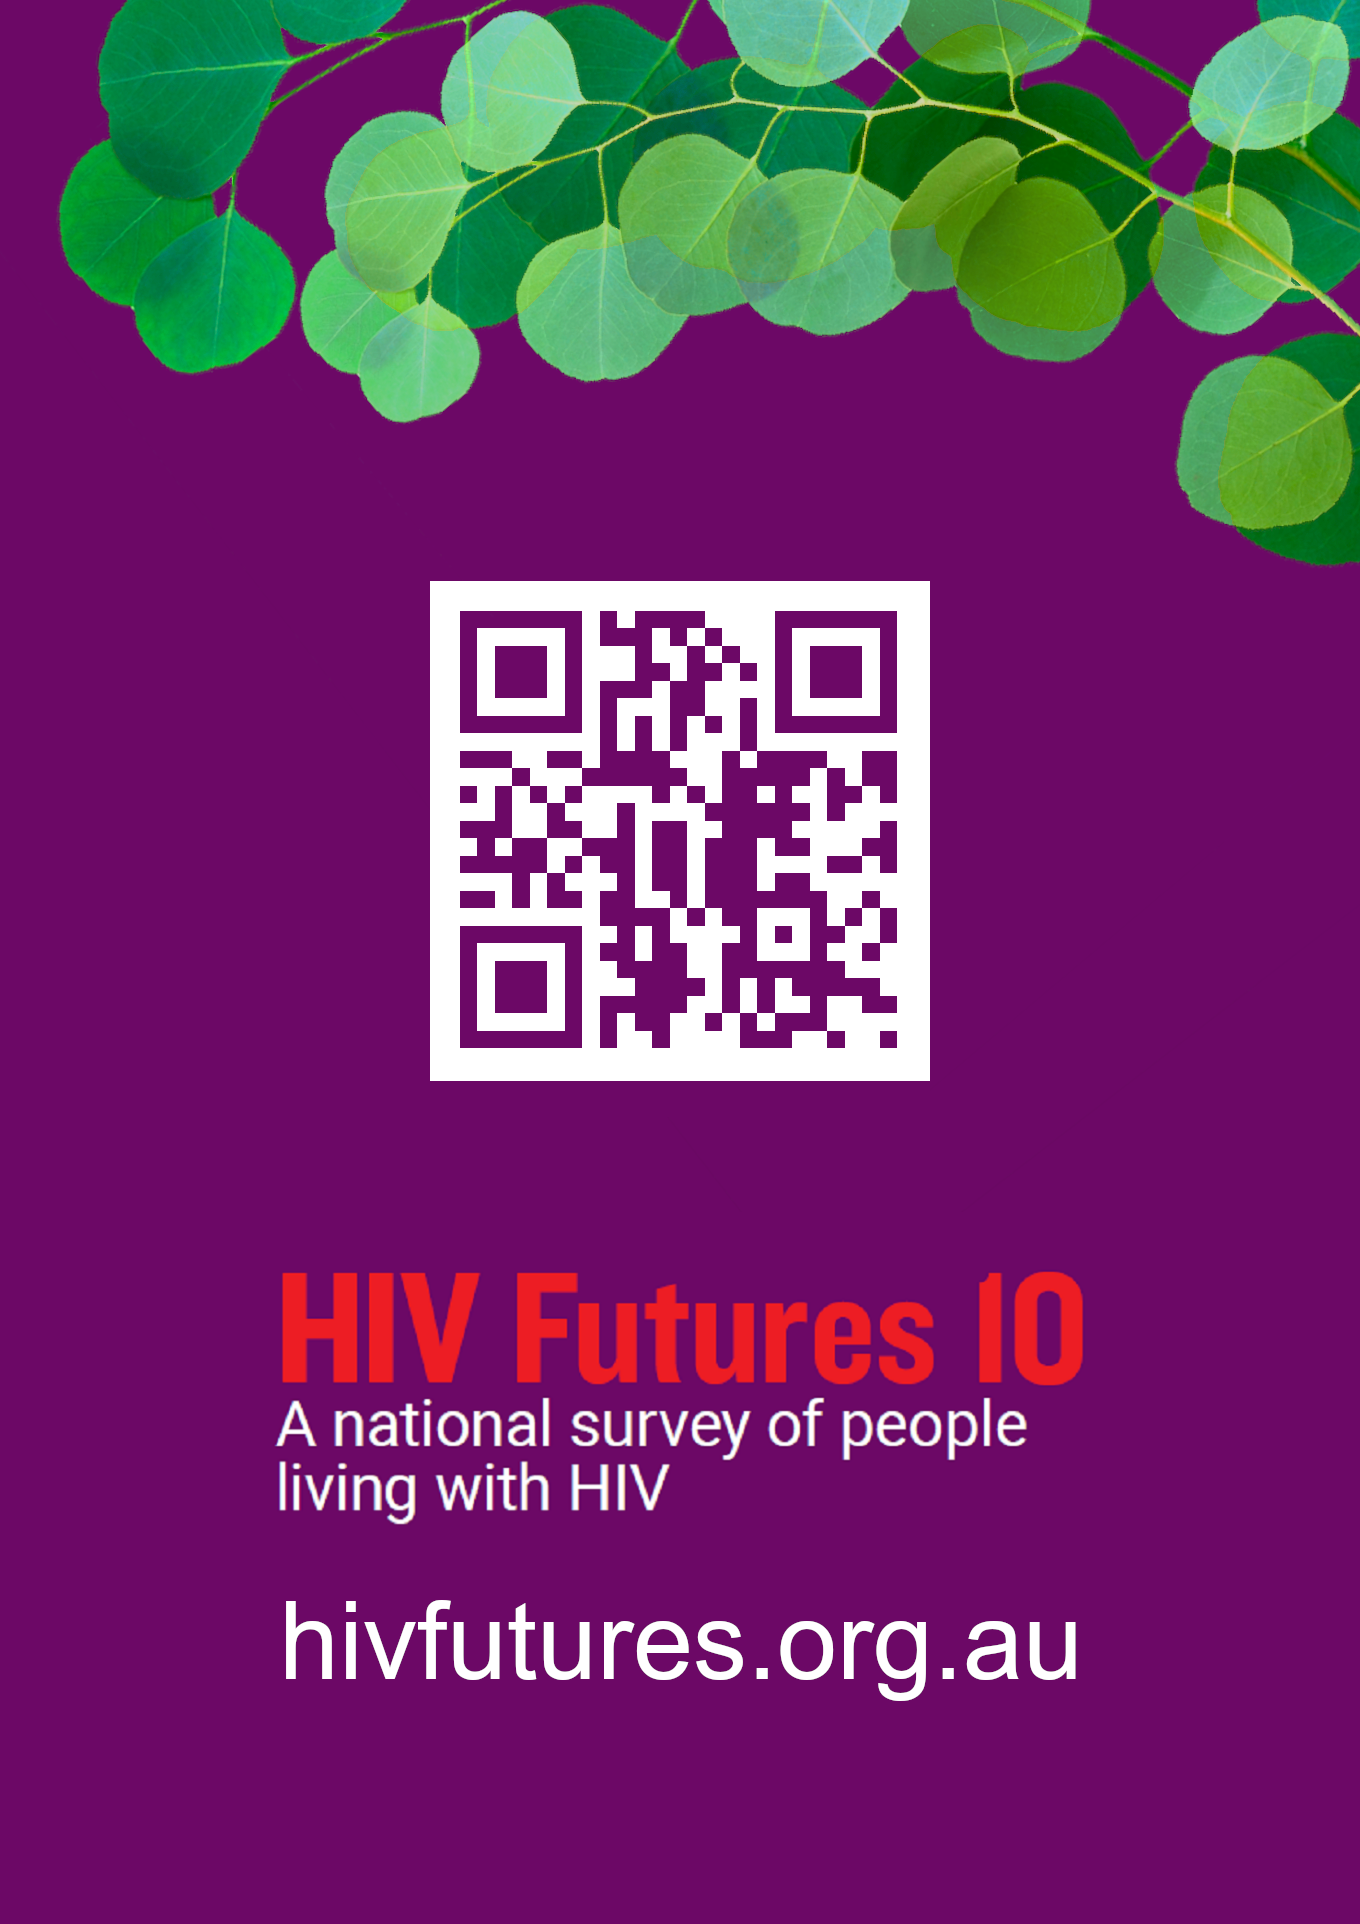 Design of green gum leaves on plum background with text 'HIV Futures 10 A national survey of people living with HIV hivfutures.org.au' and QR code